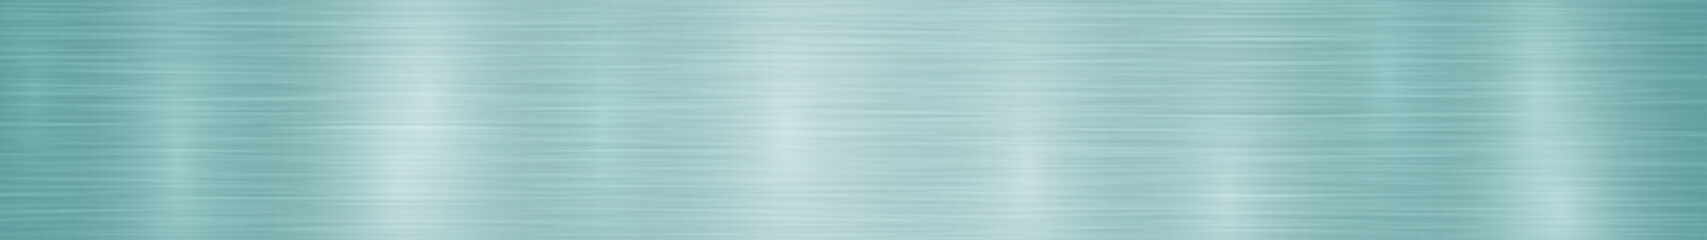 Abstract horizontal metal banner or background with glares in light blue colors